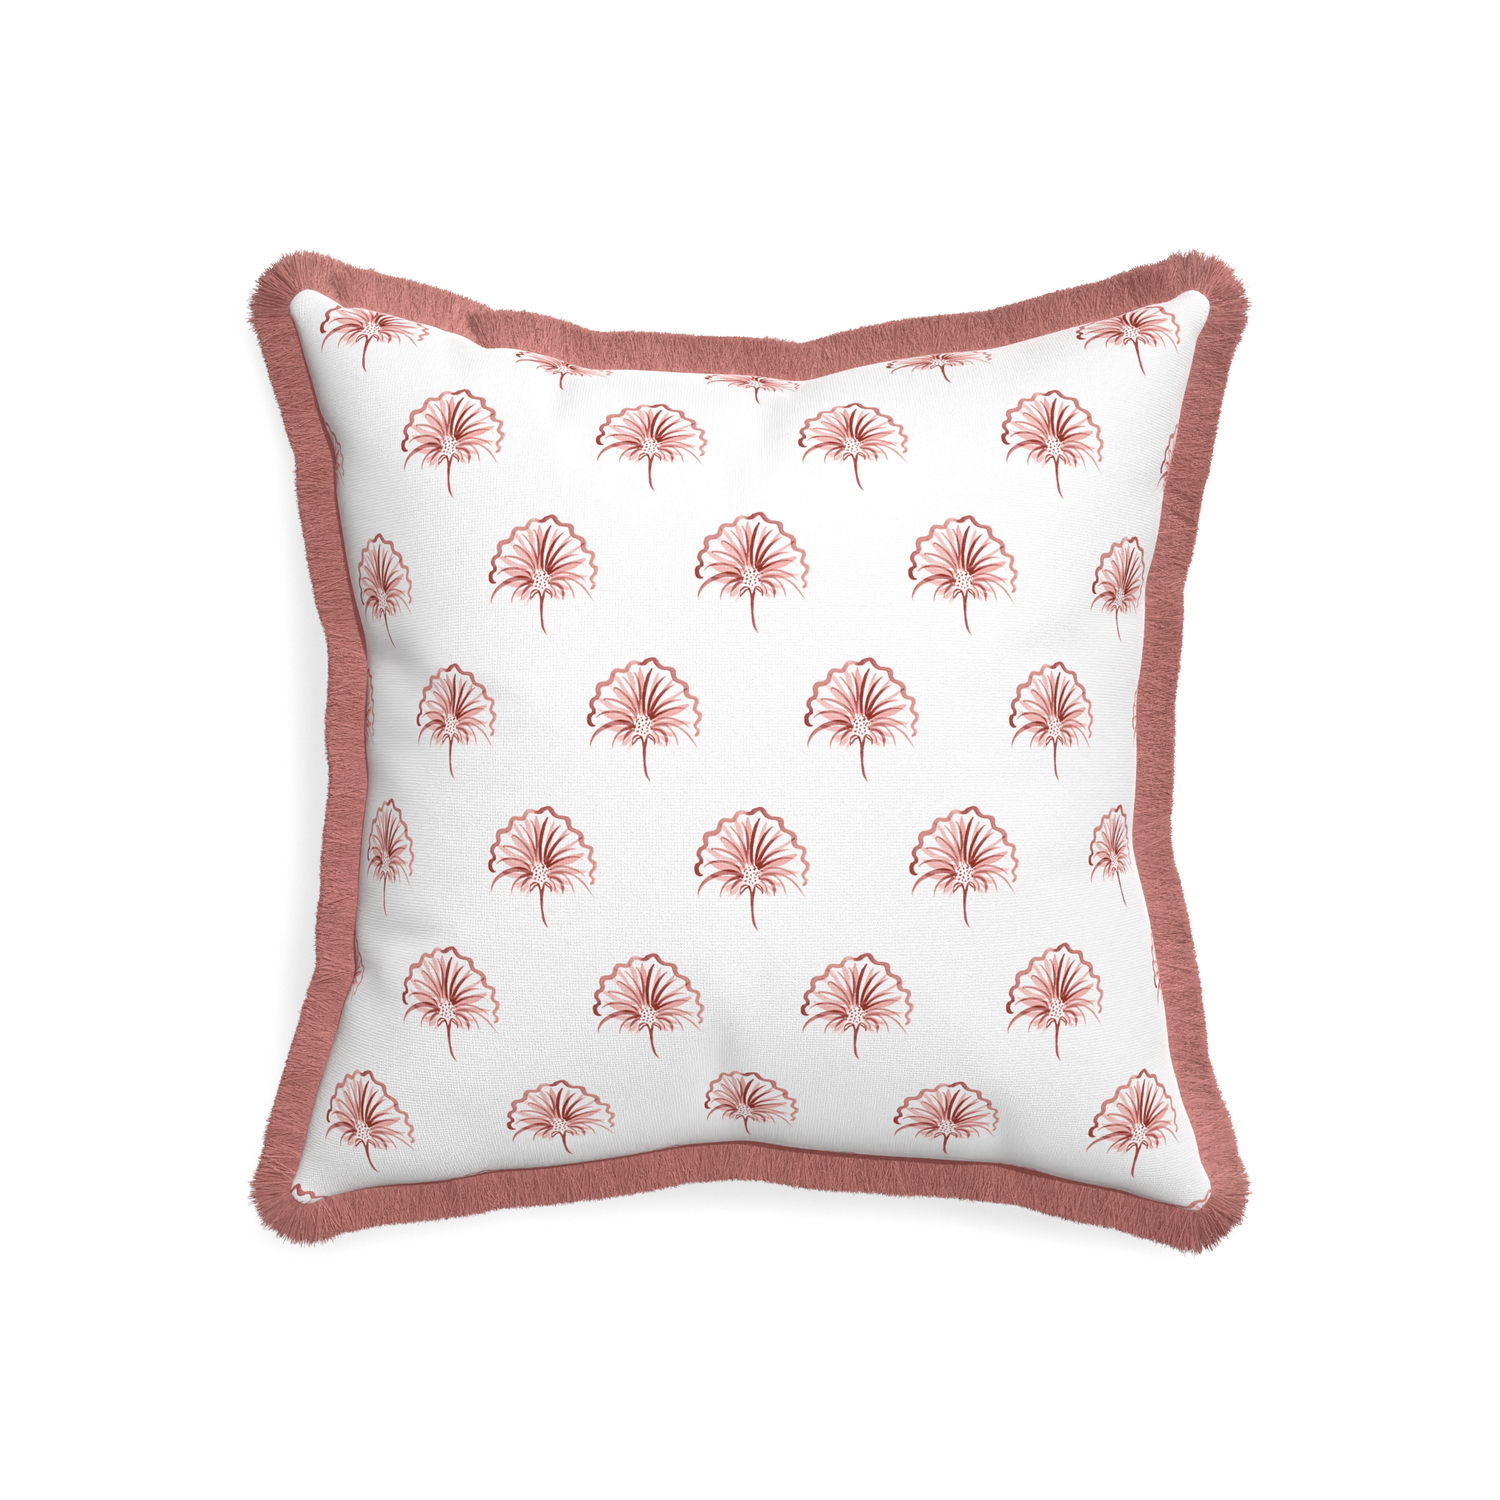 20-square penelope rose custom floral pinkpillow with d fringe on white background